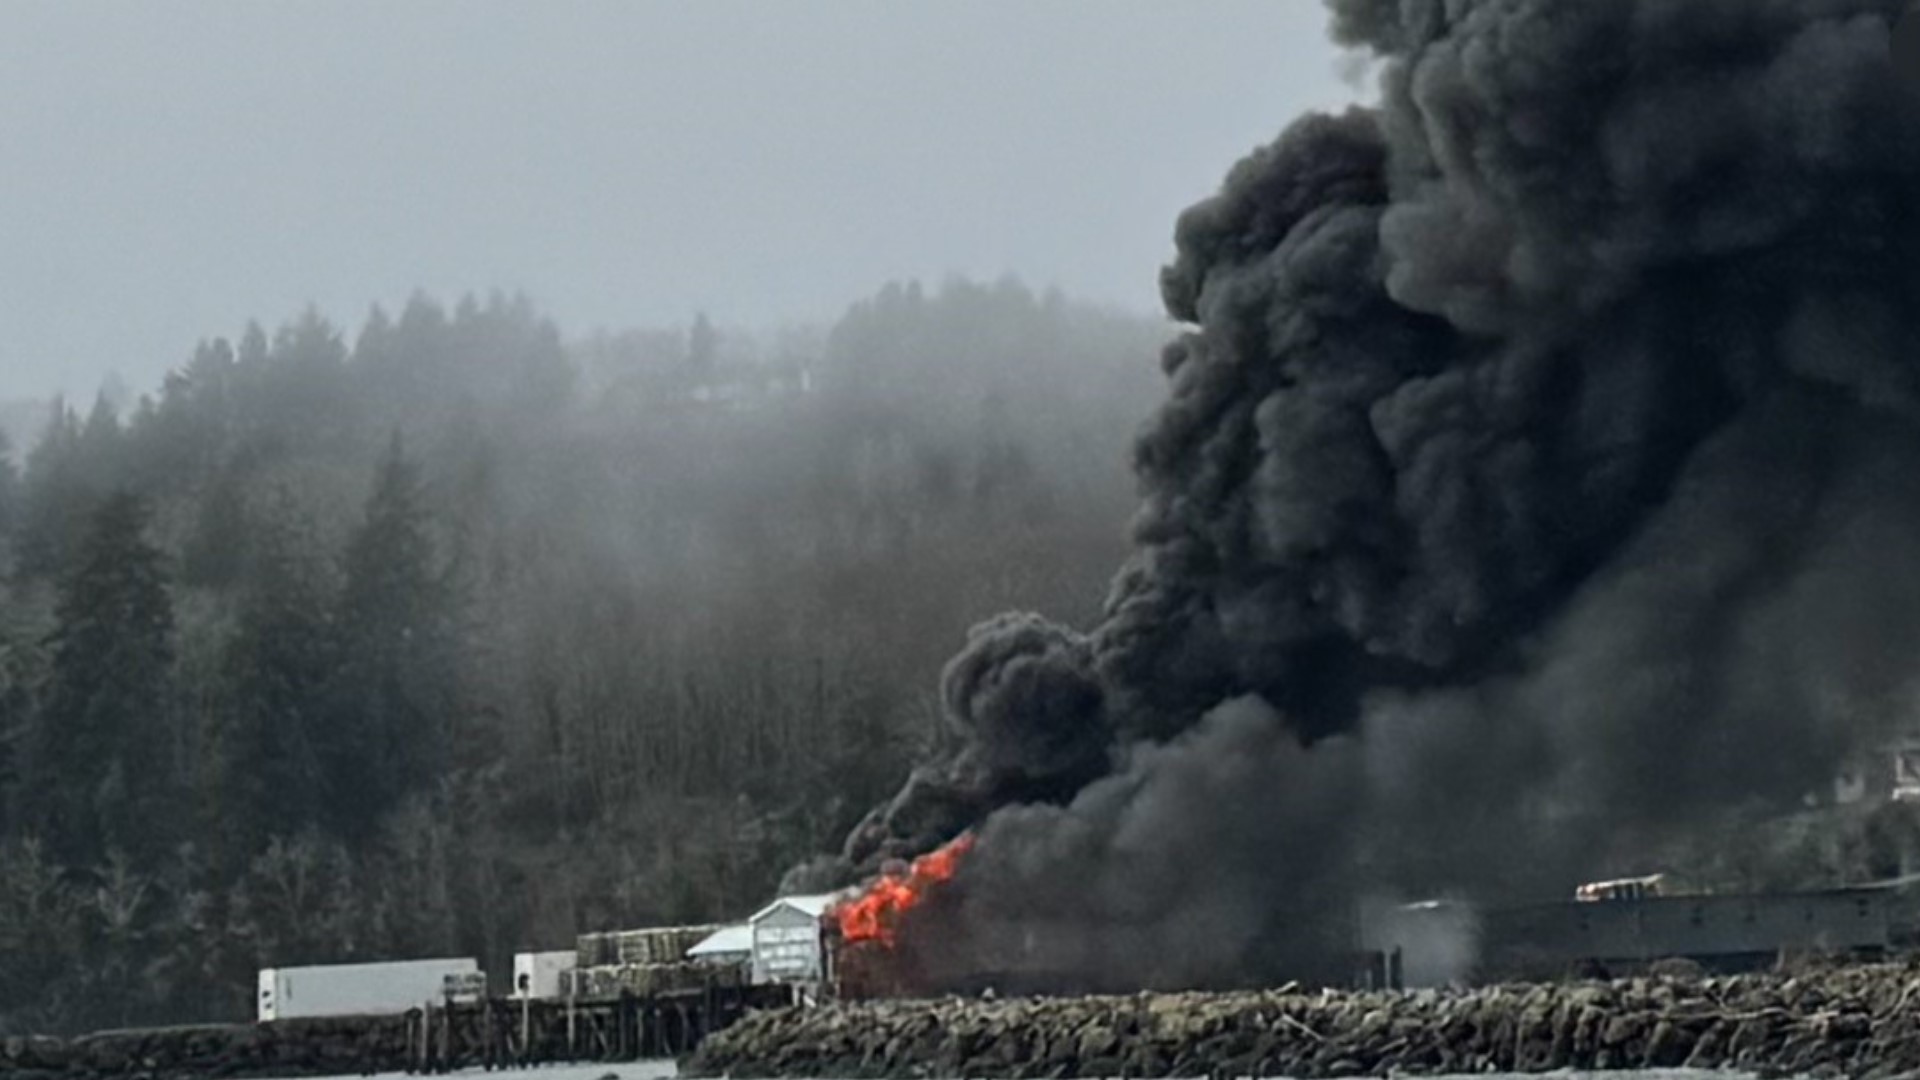 Ilwaco seafood processing facility catches fire | Raw video - KGW.com